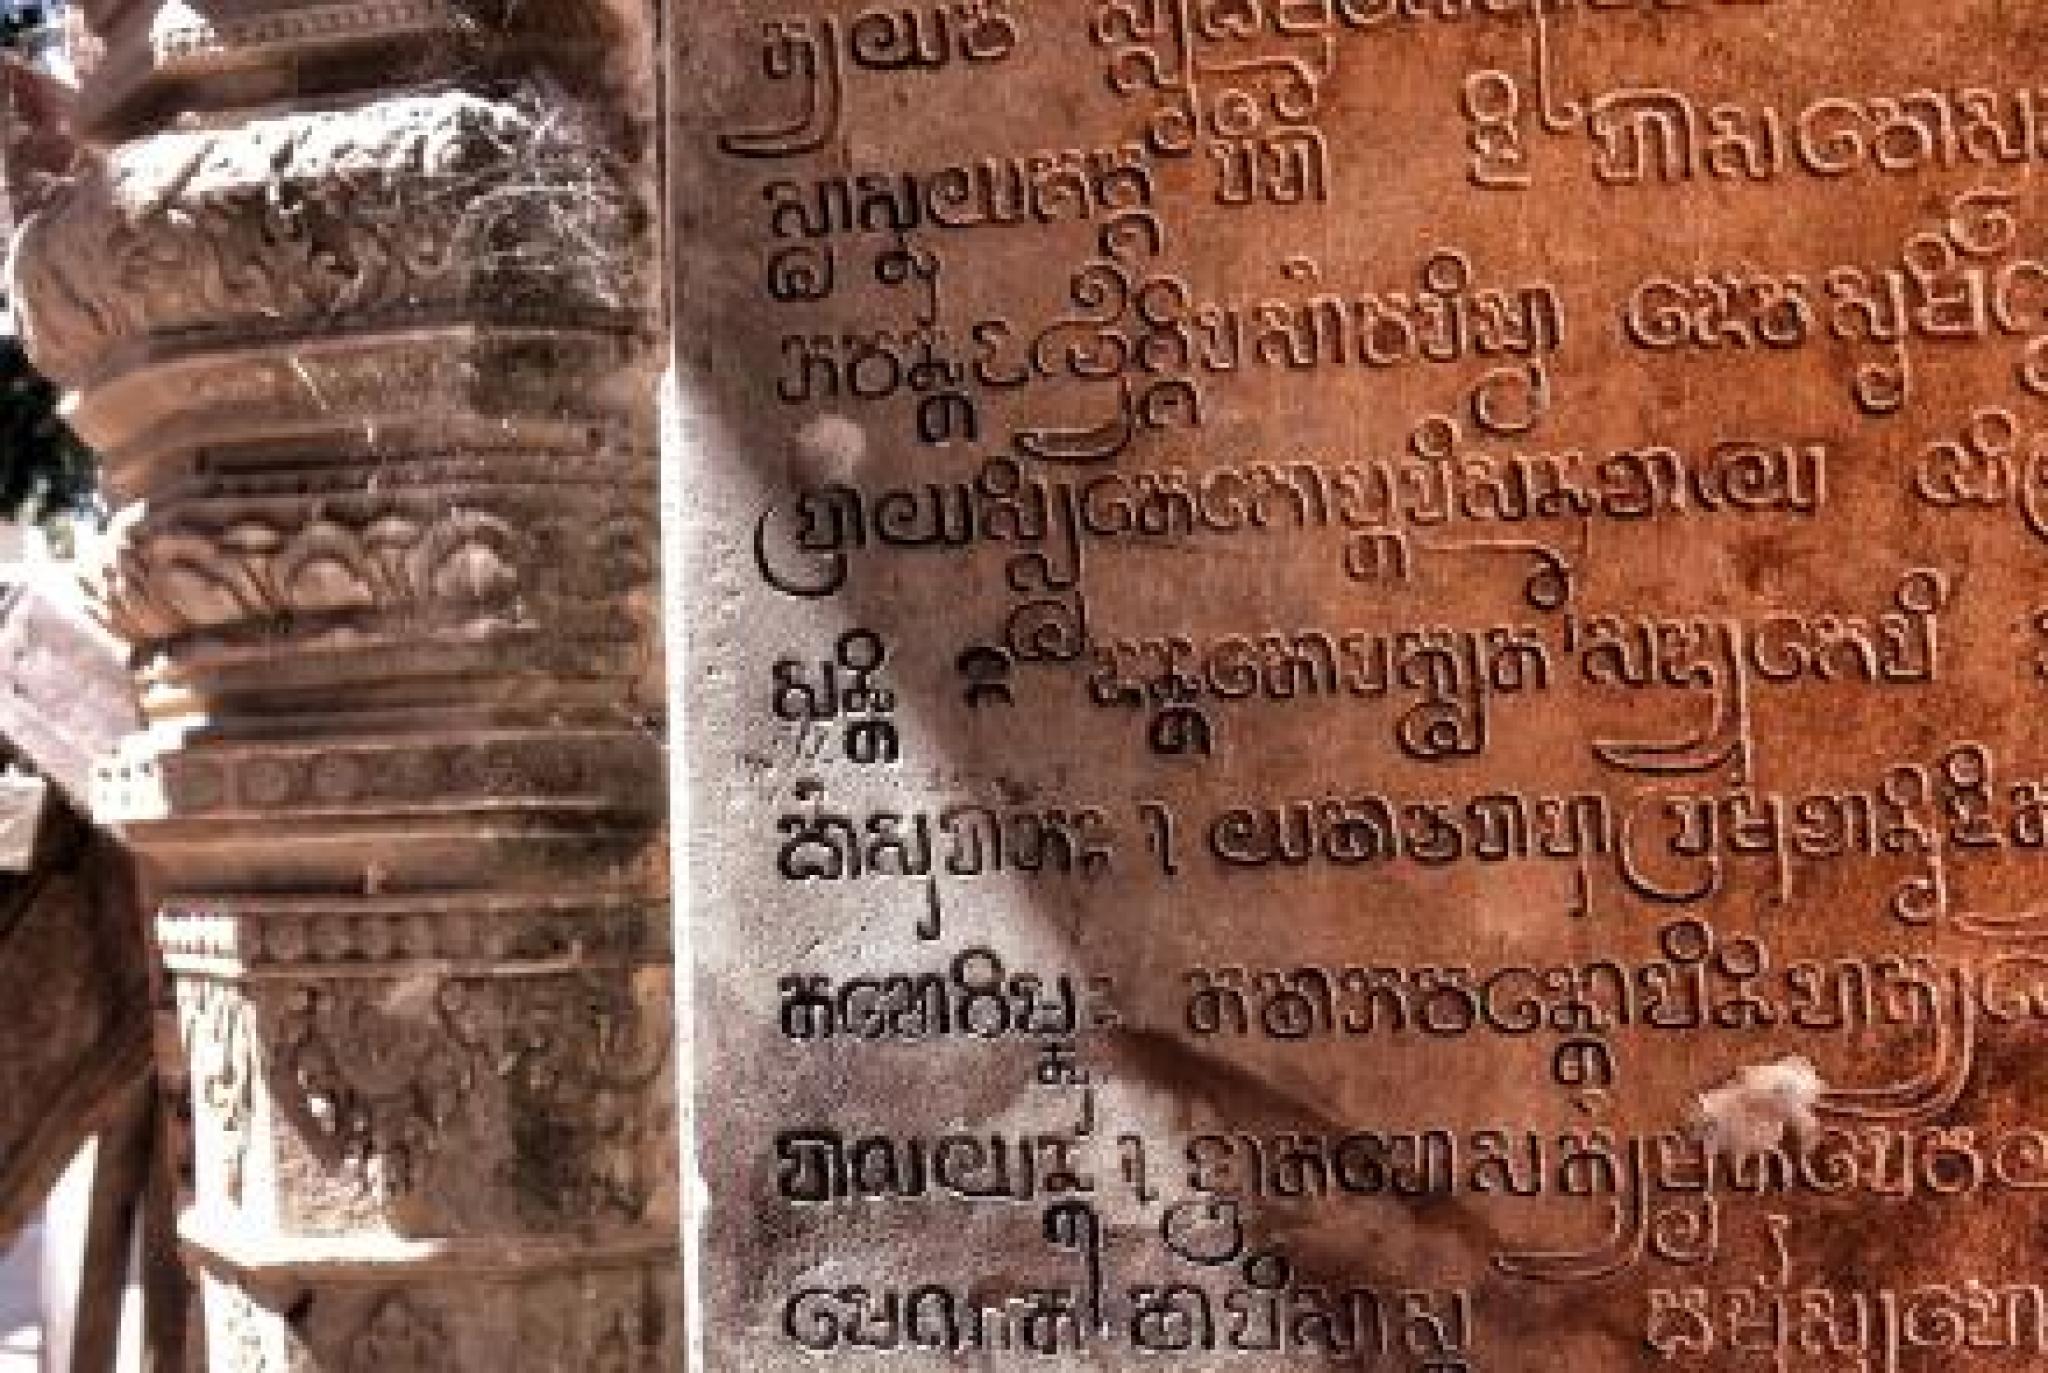 ANU helps save Sanskrit in Cambodia